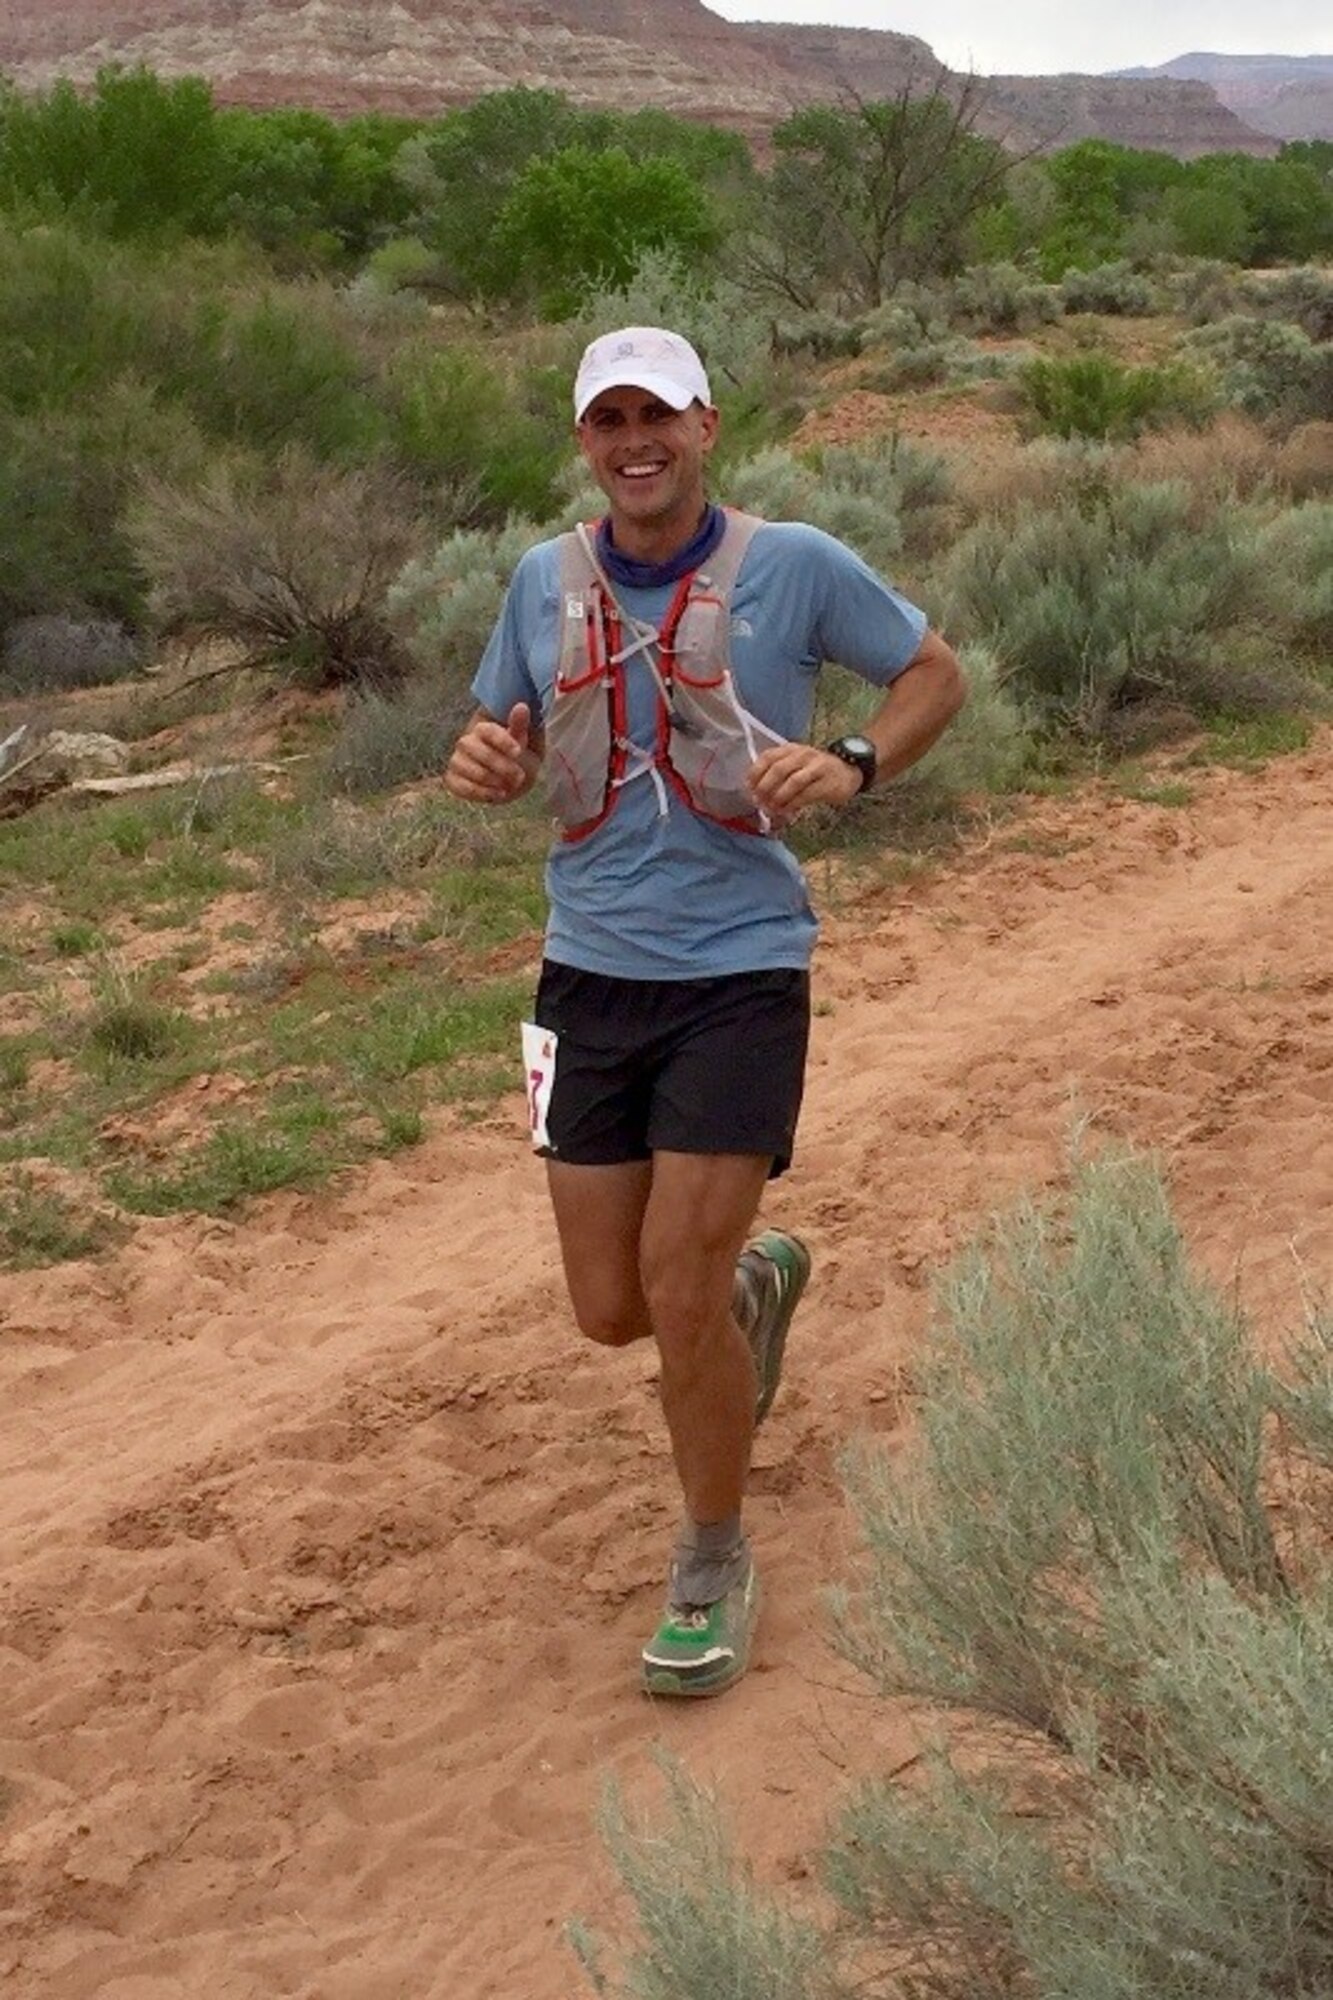 Maj. Peter Cossette, 944 Fighter Wing F-35 instructor pilot, is photographed running during the Zion 100 Mile Ultra Marathon along the outskirts of Zion National Park in Utah in just over 25 hours April 8-9. (Courtesy photo)